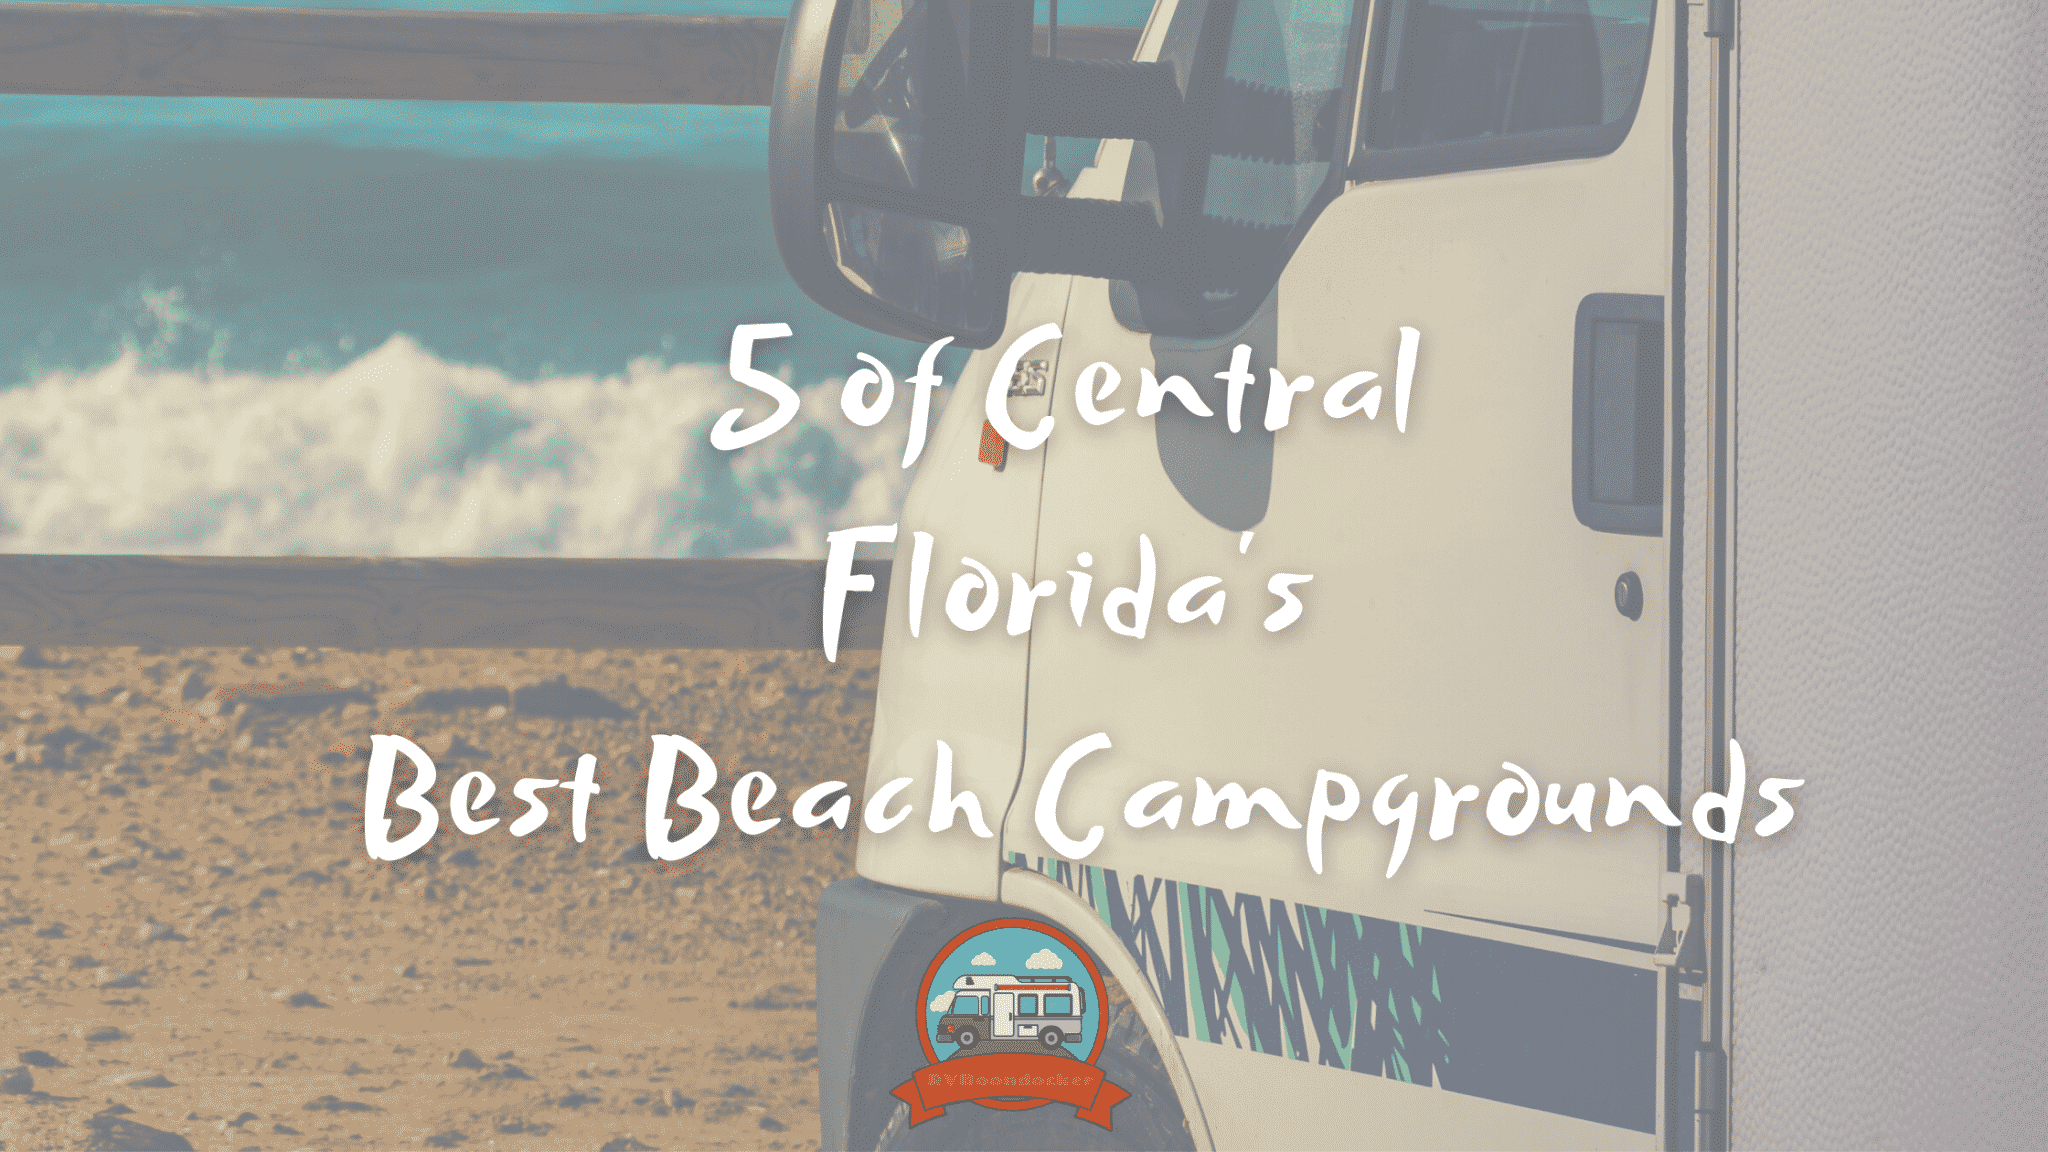 5 of central floridas beach camping campgrounds